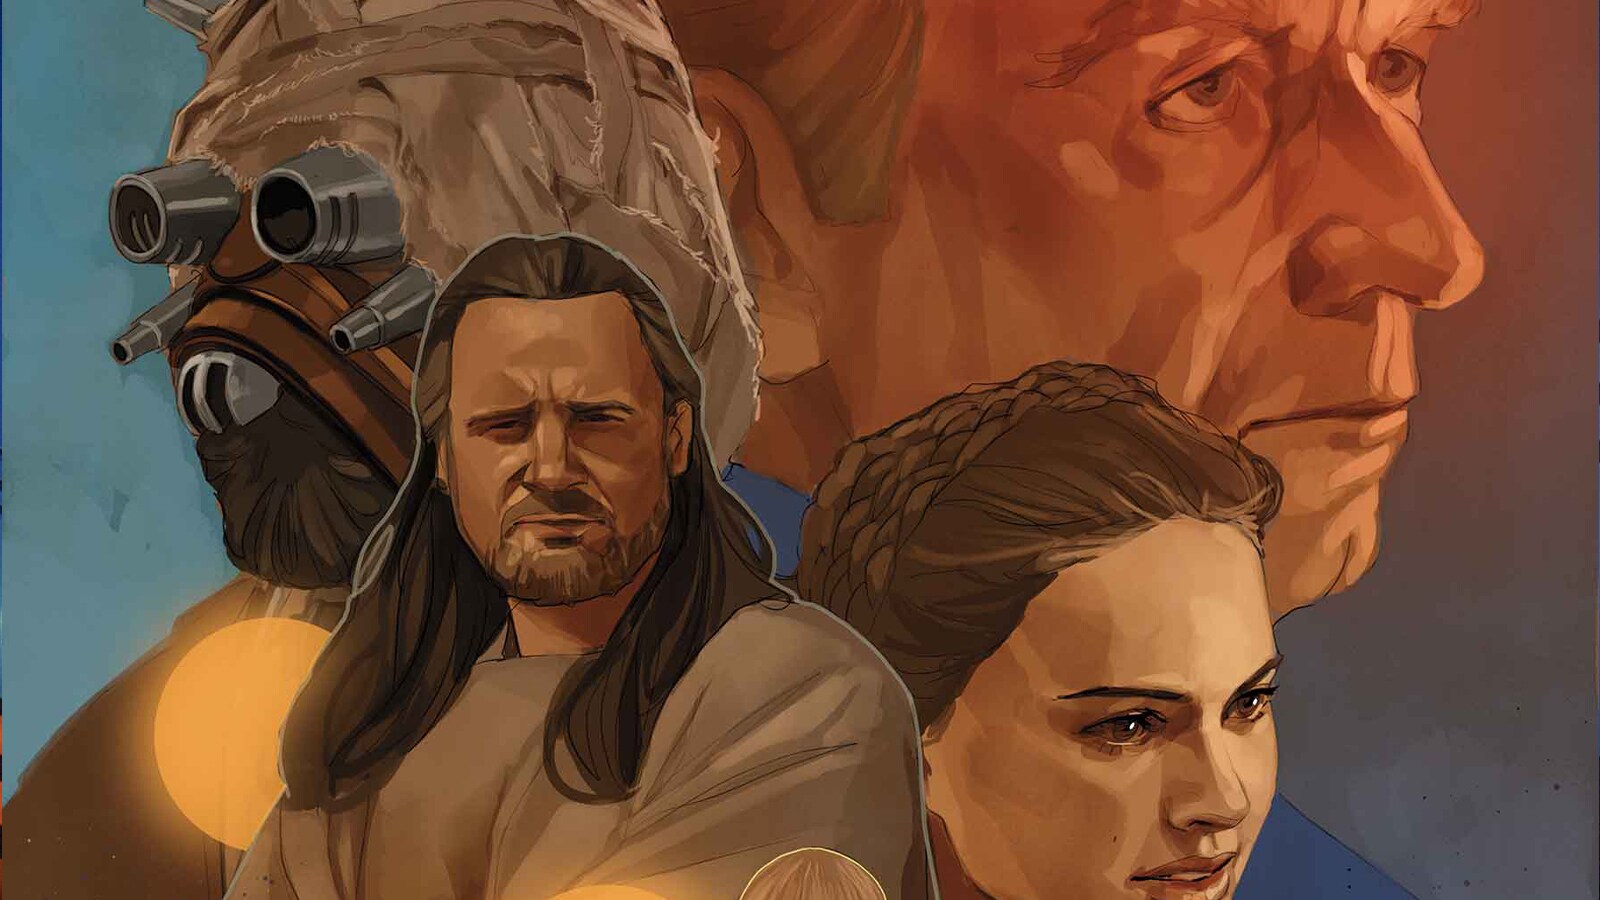   Inside Marvel’s Star Wars: The Phantom Menace 25th Anniversary Special #1 – First Look